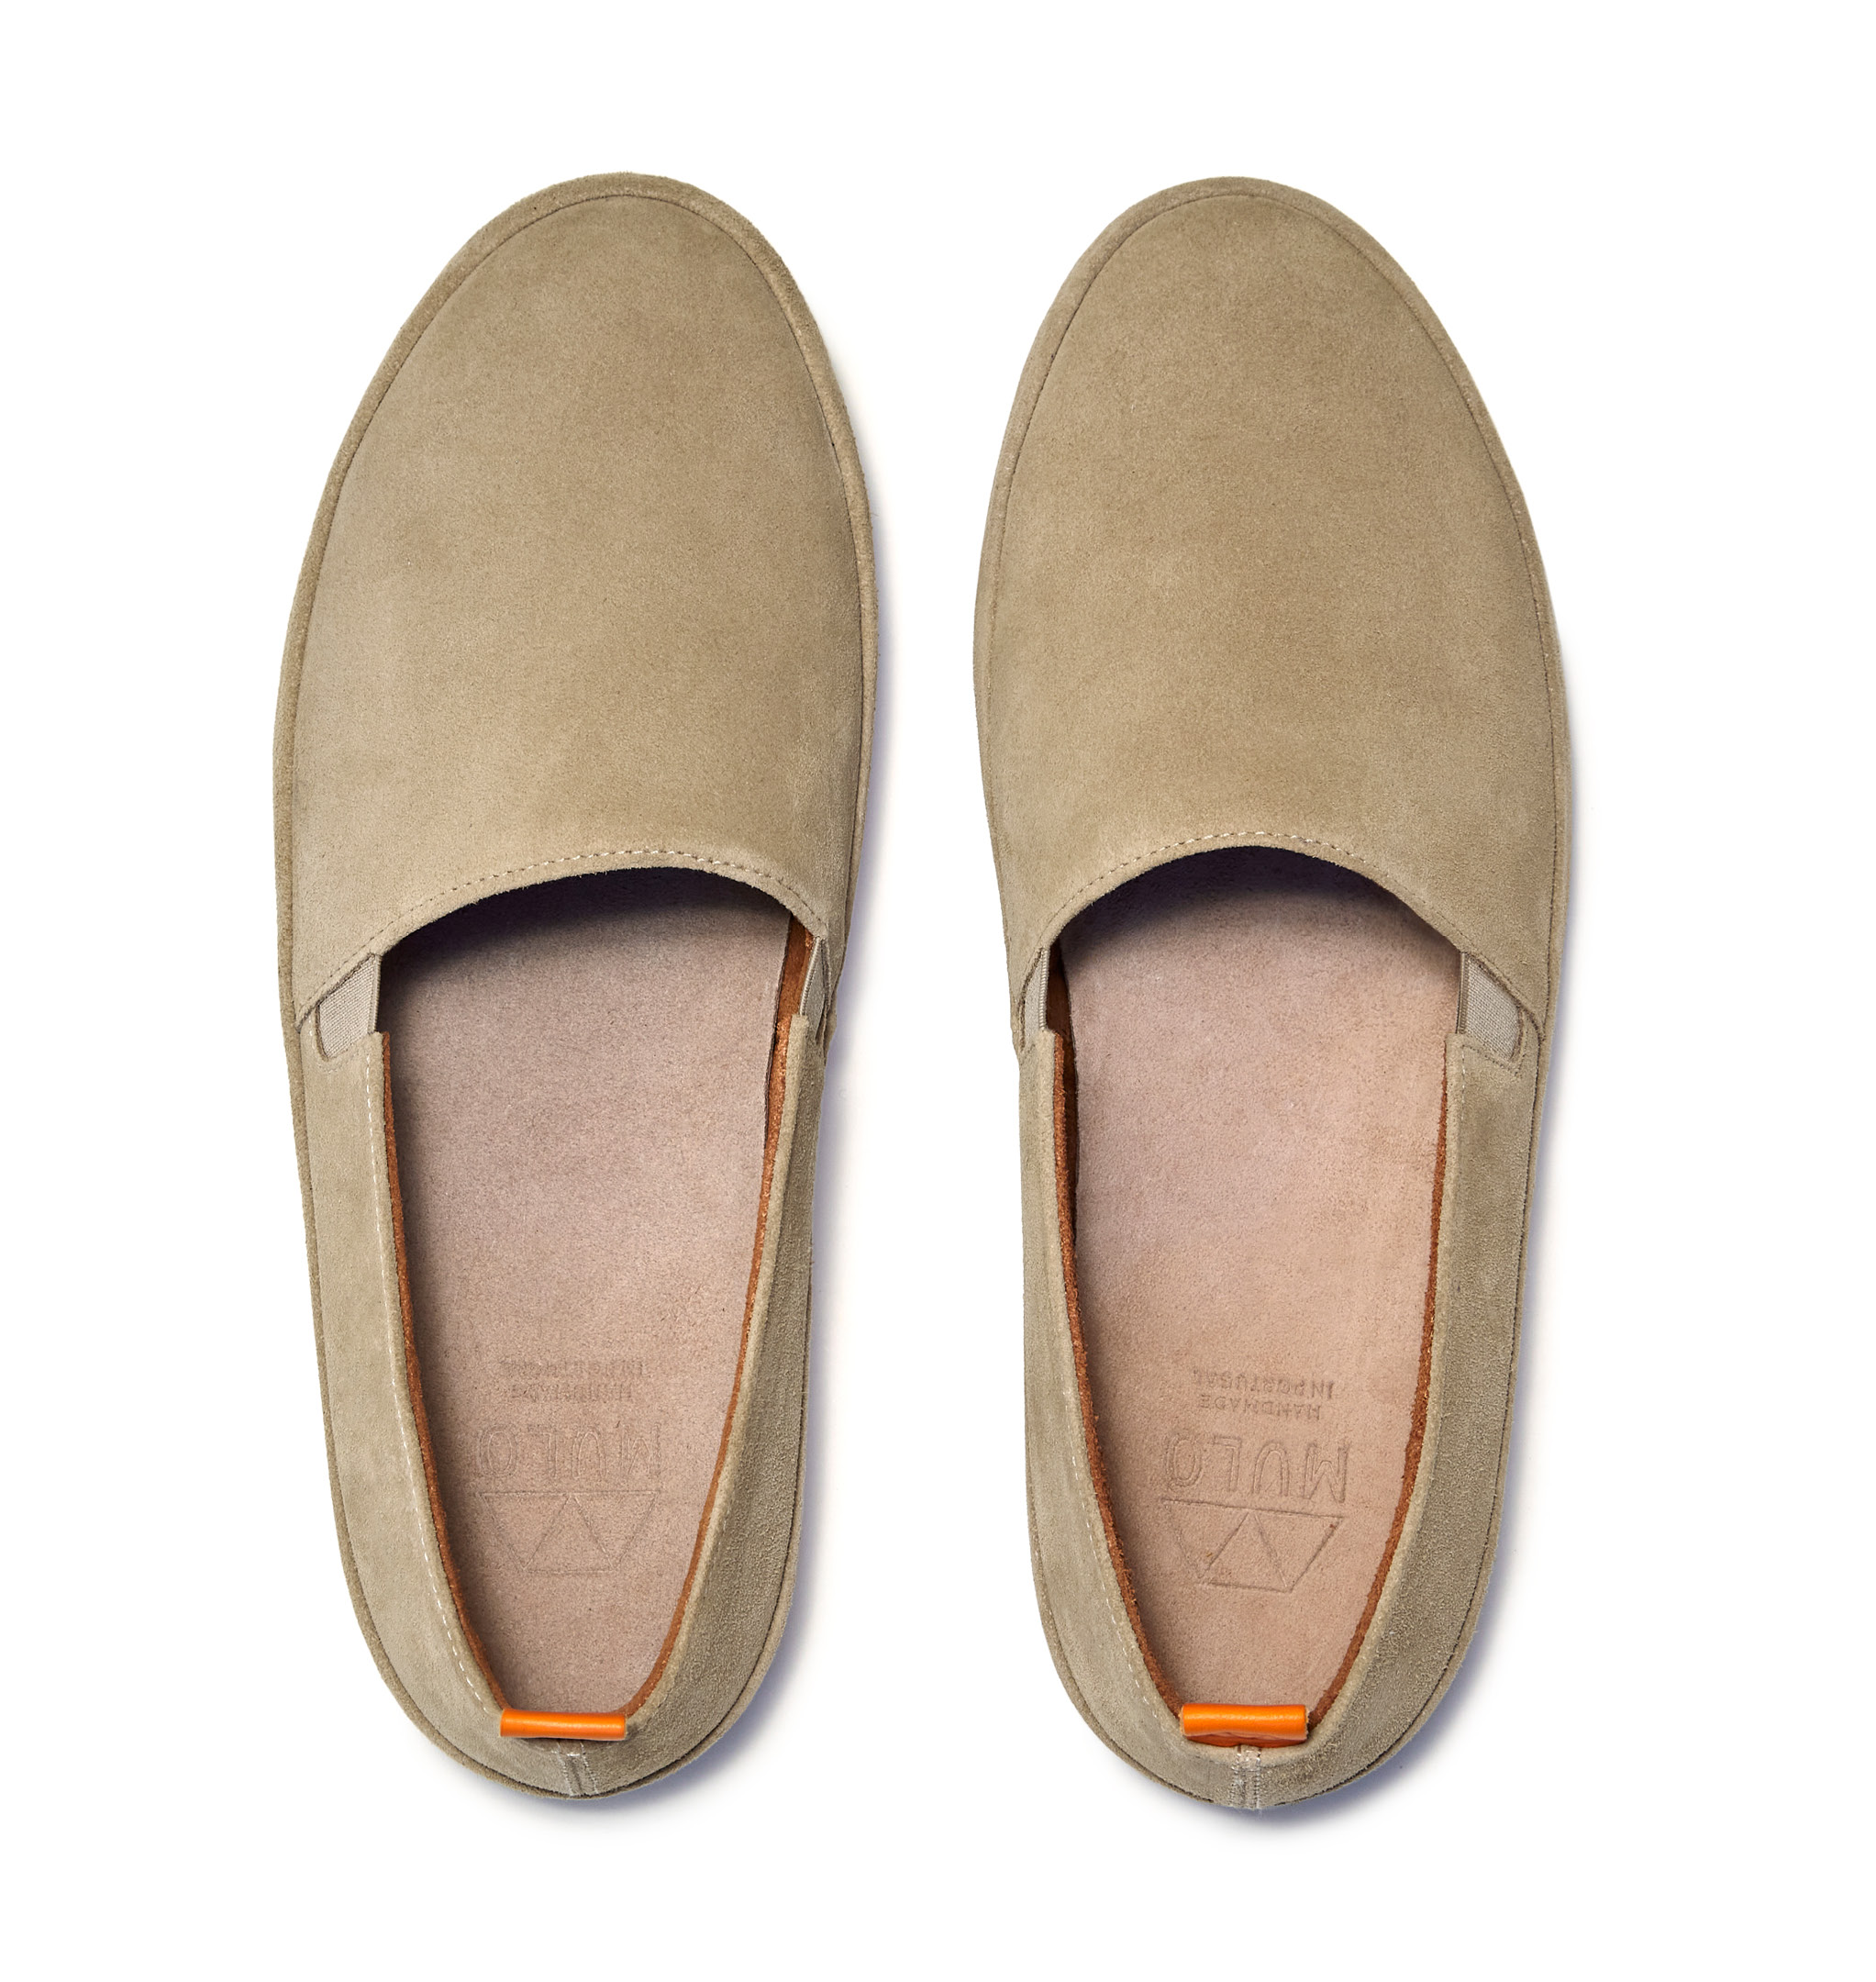 https://www.muloshoes.com/wp-content/uploads/Suede-Tan-Loafers-for-Men.jpg